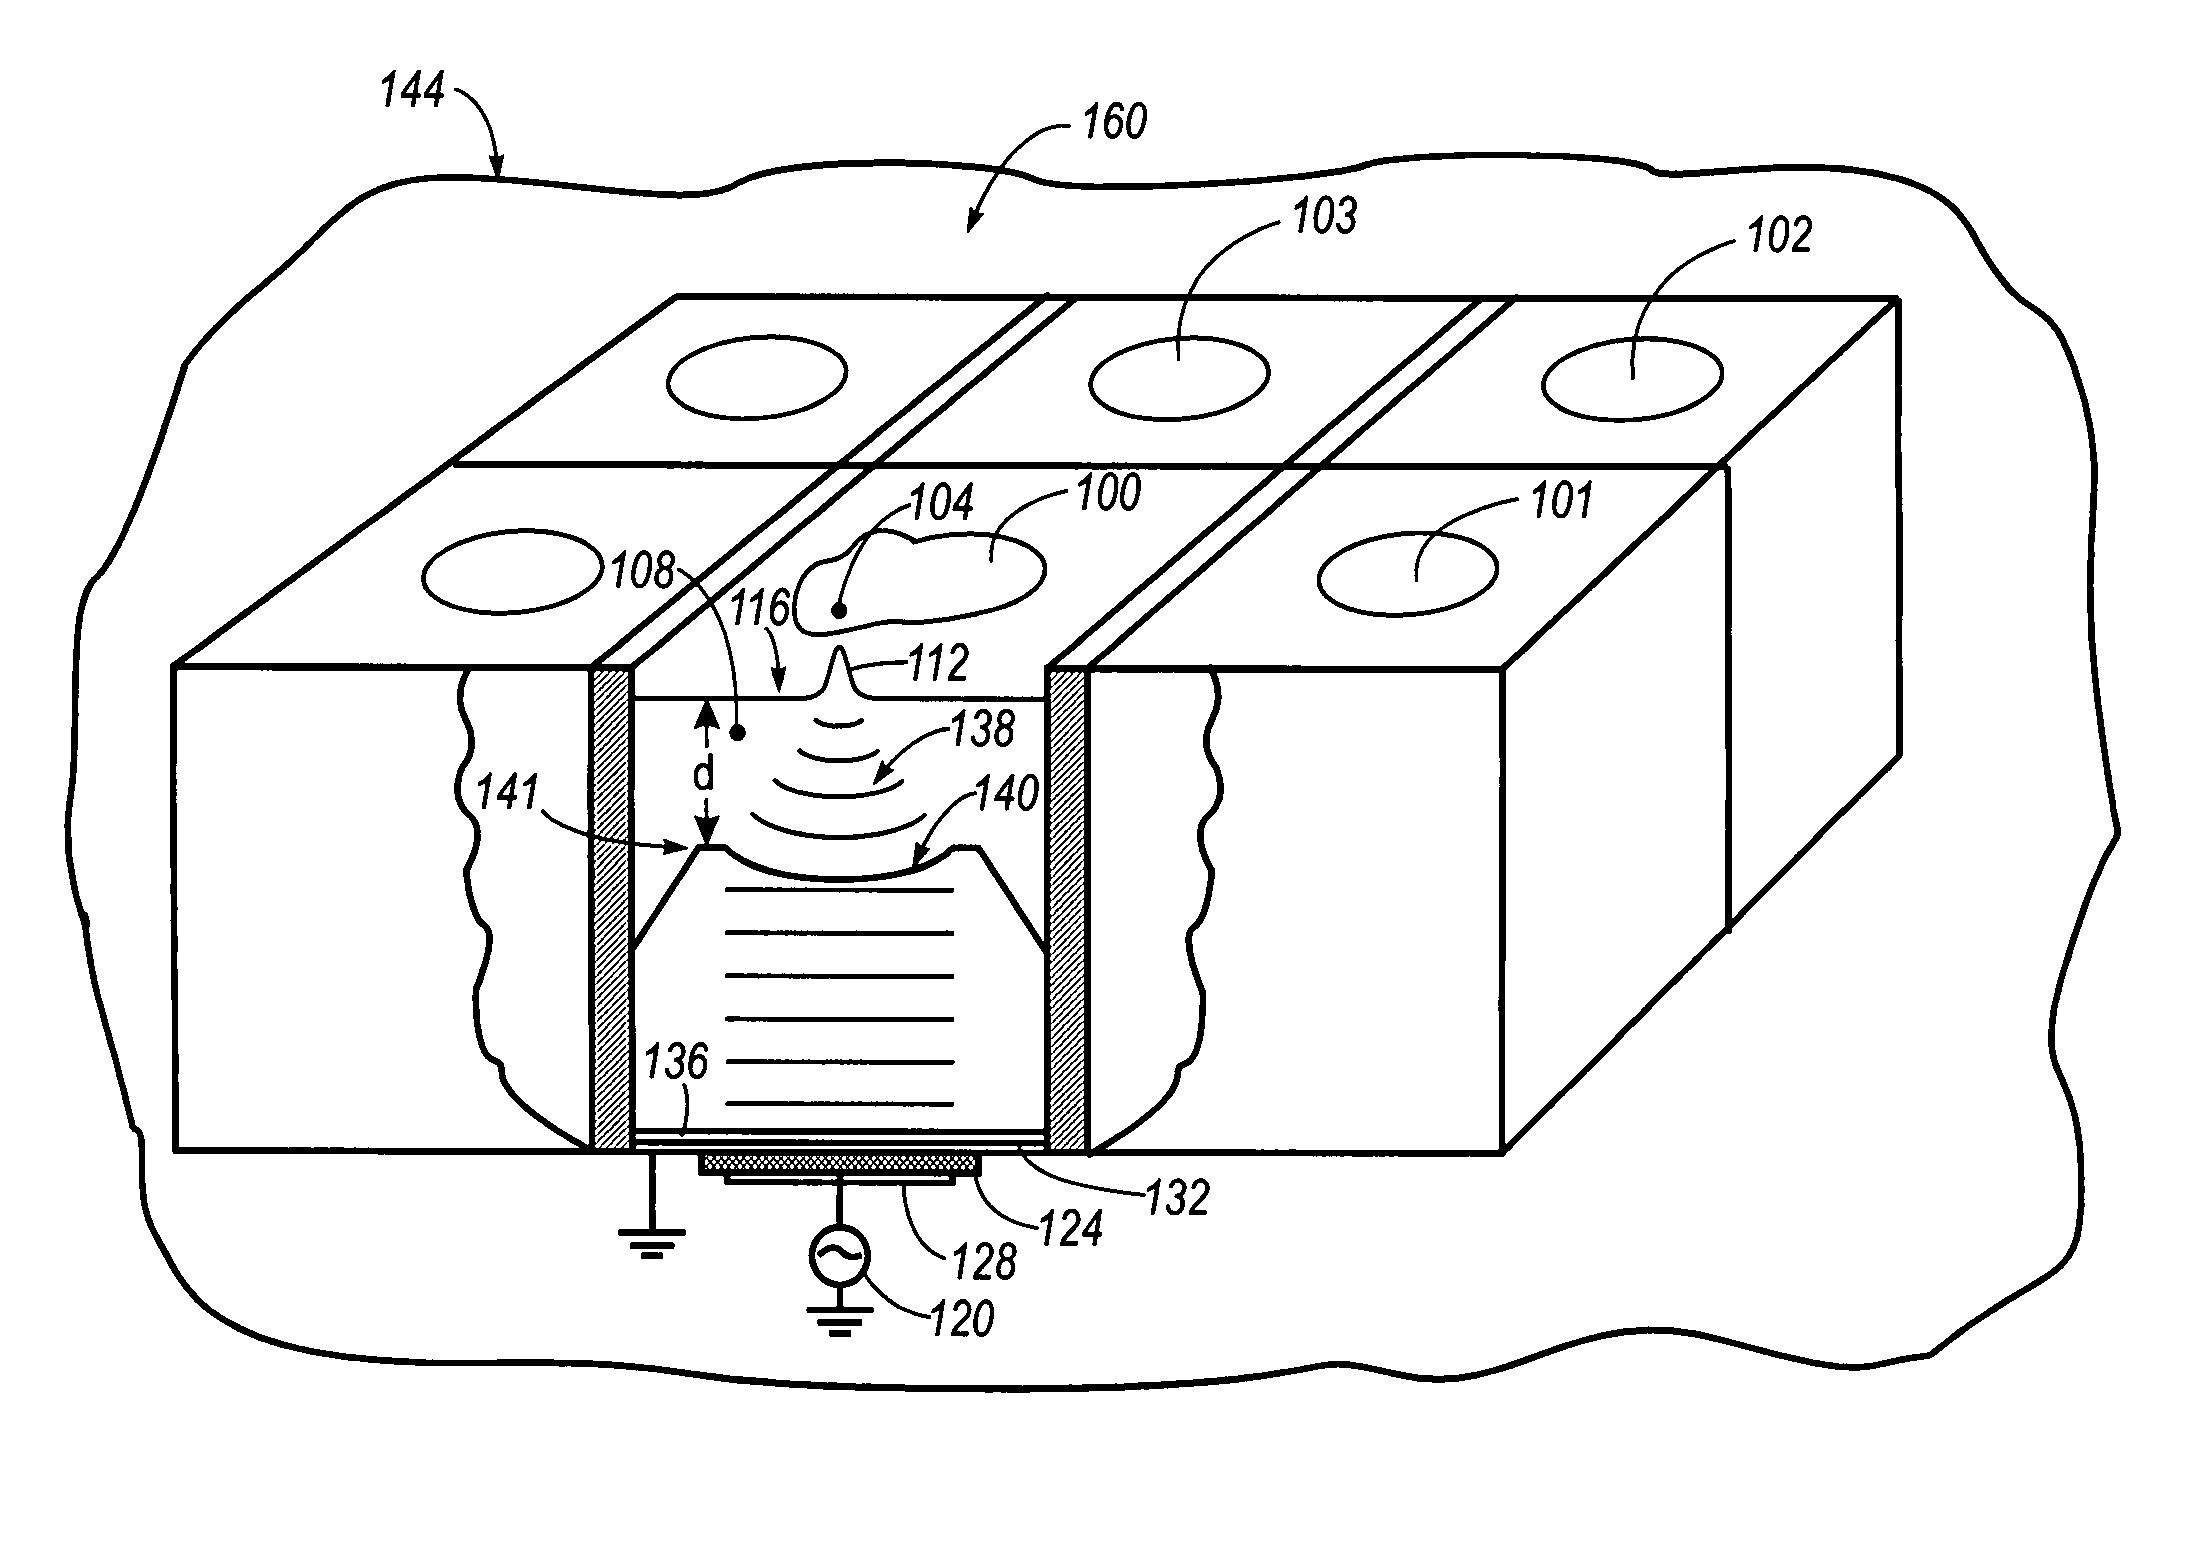 Method of using focused acoustic waves to deliver a pharmaceutical product